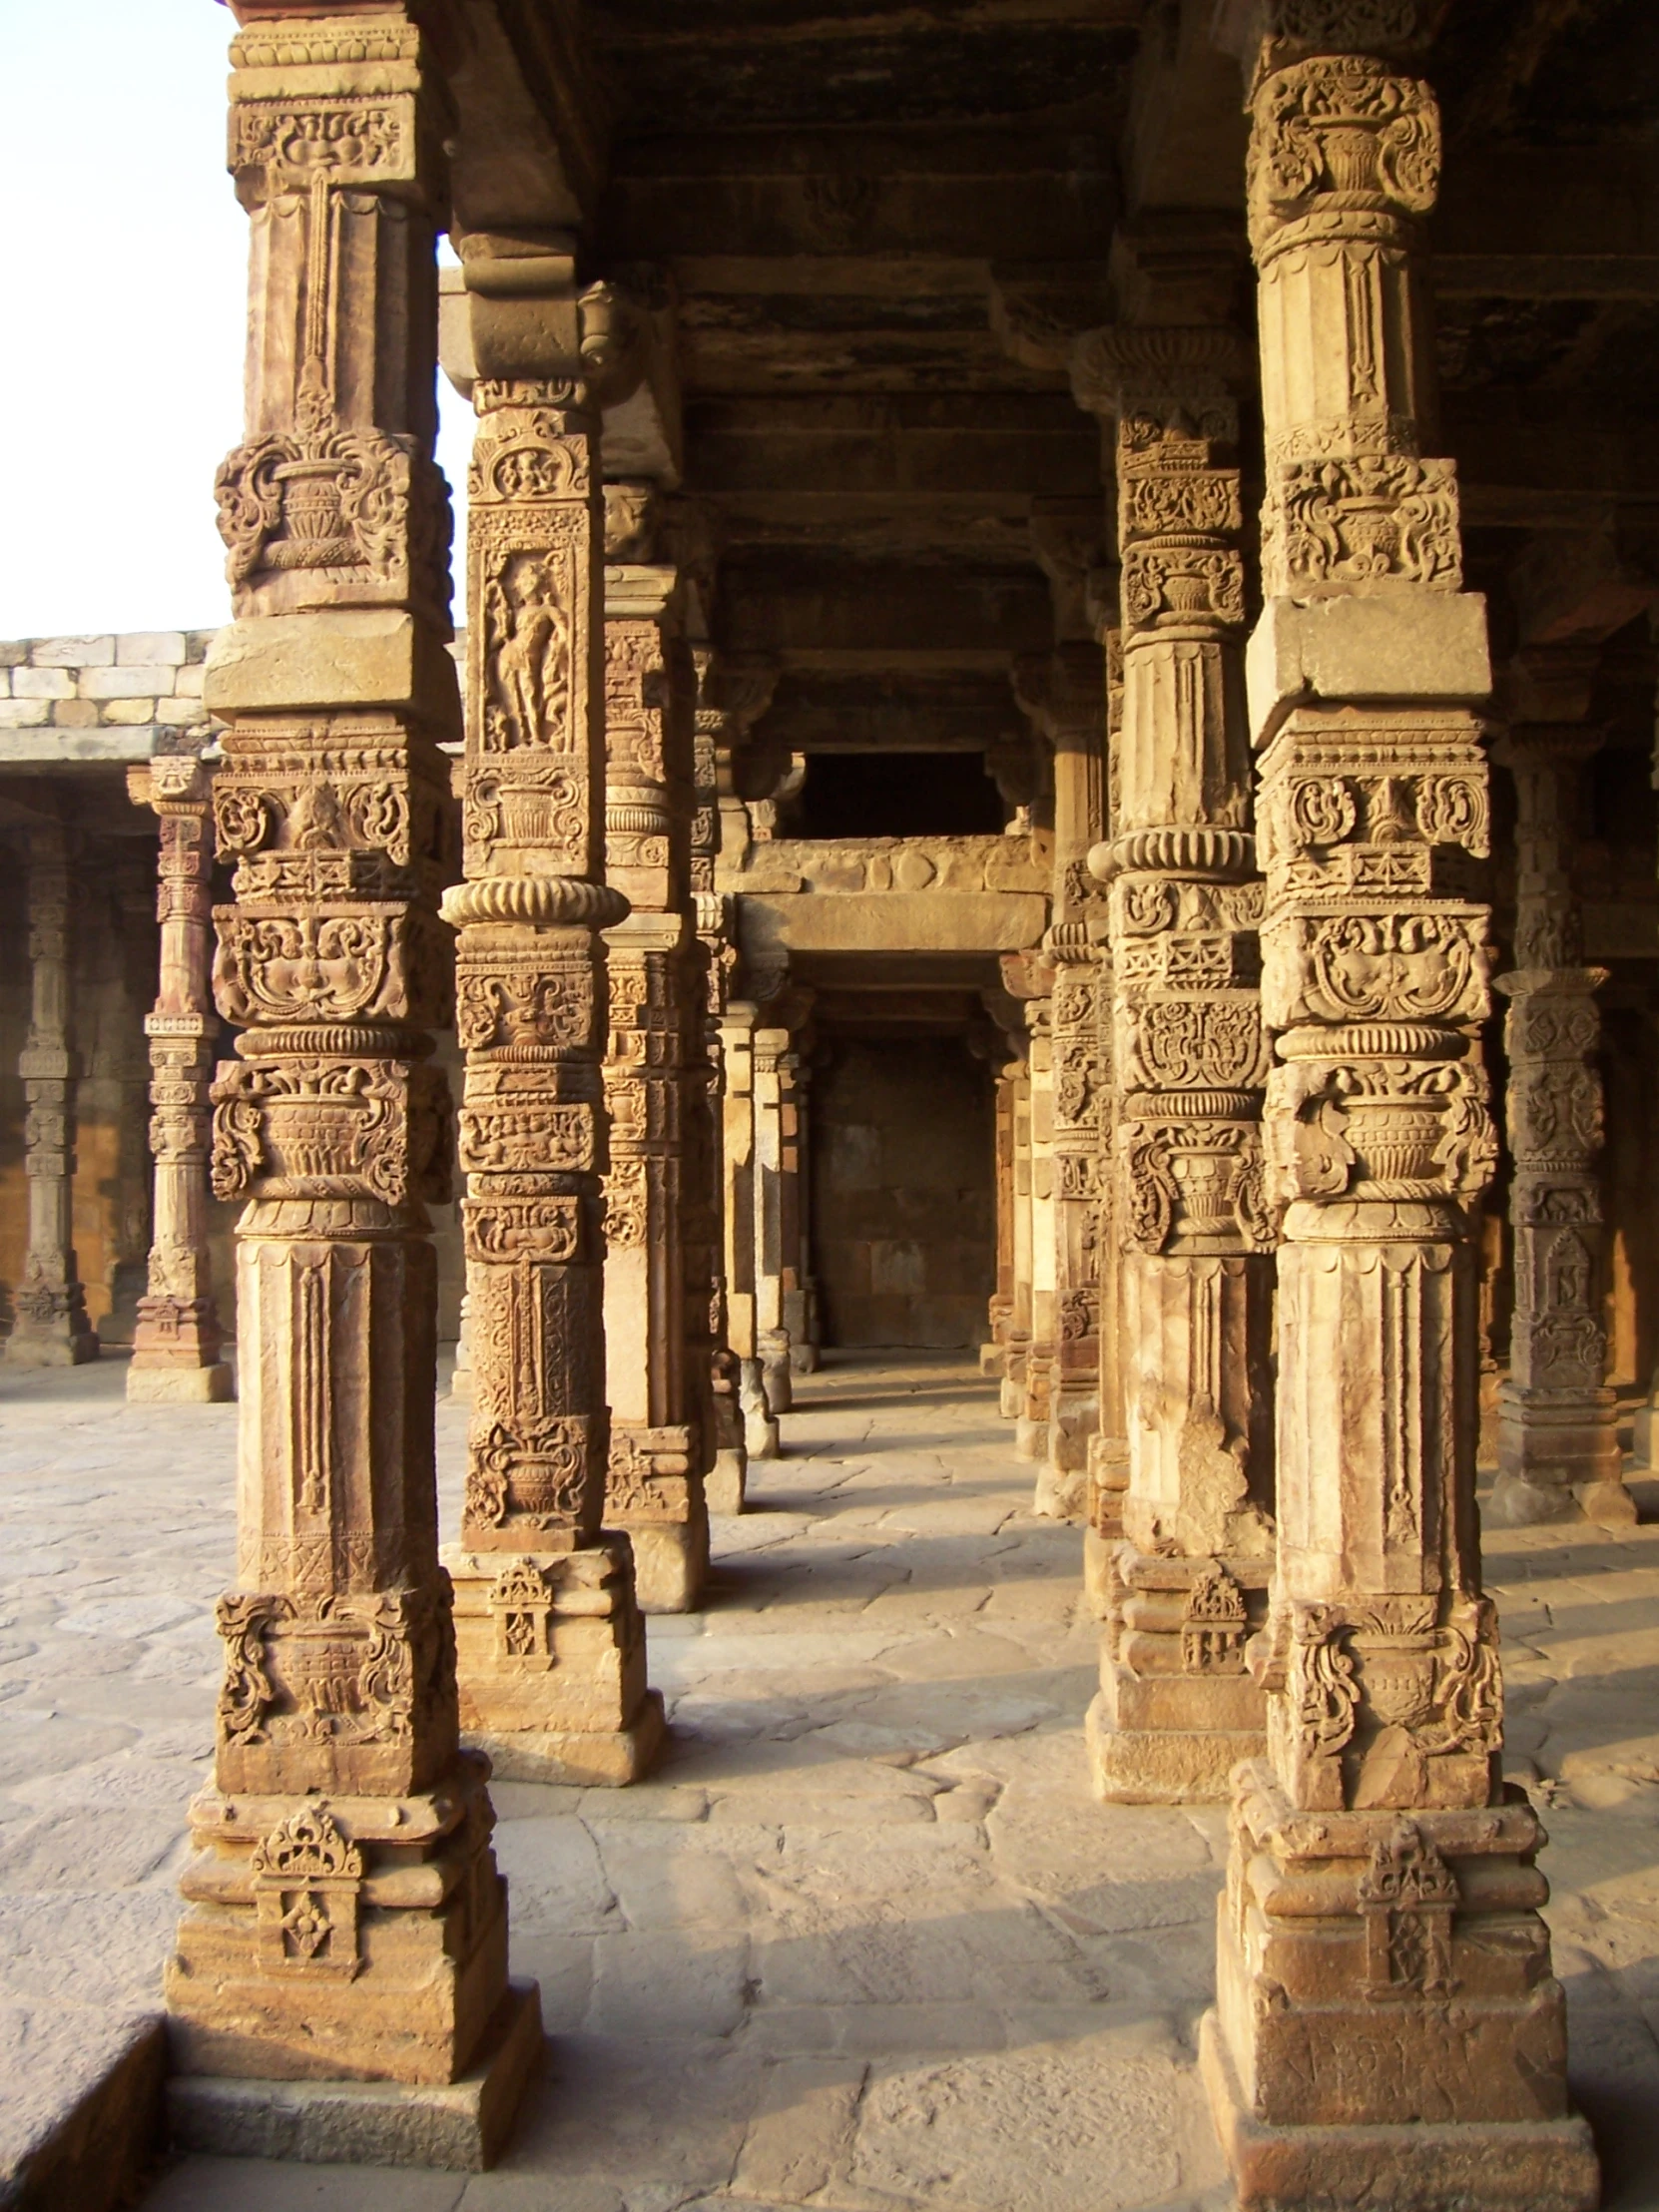 intricate pillars in a courtyard at an ancient indian temple